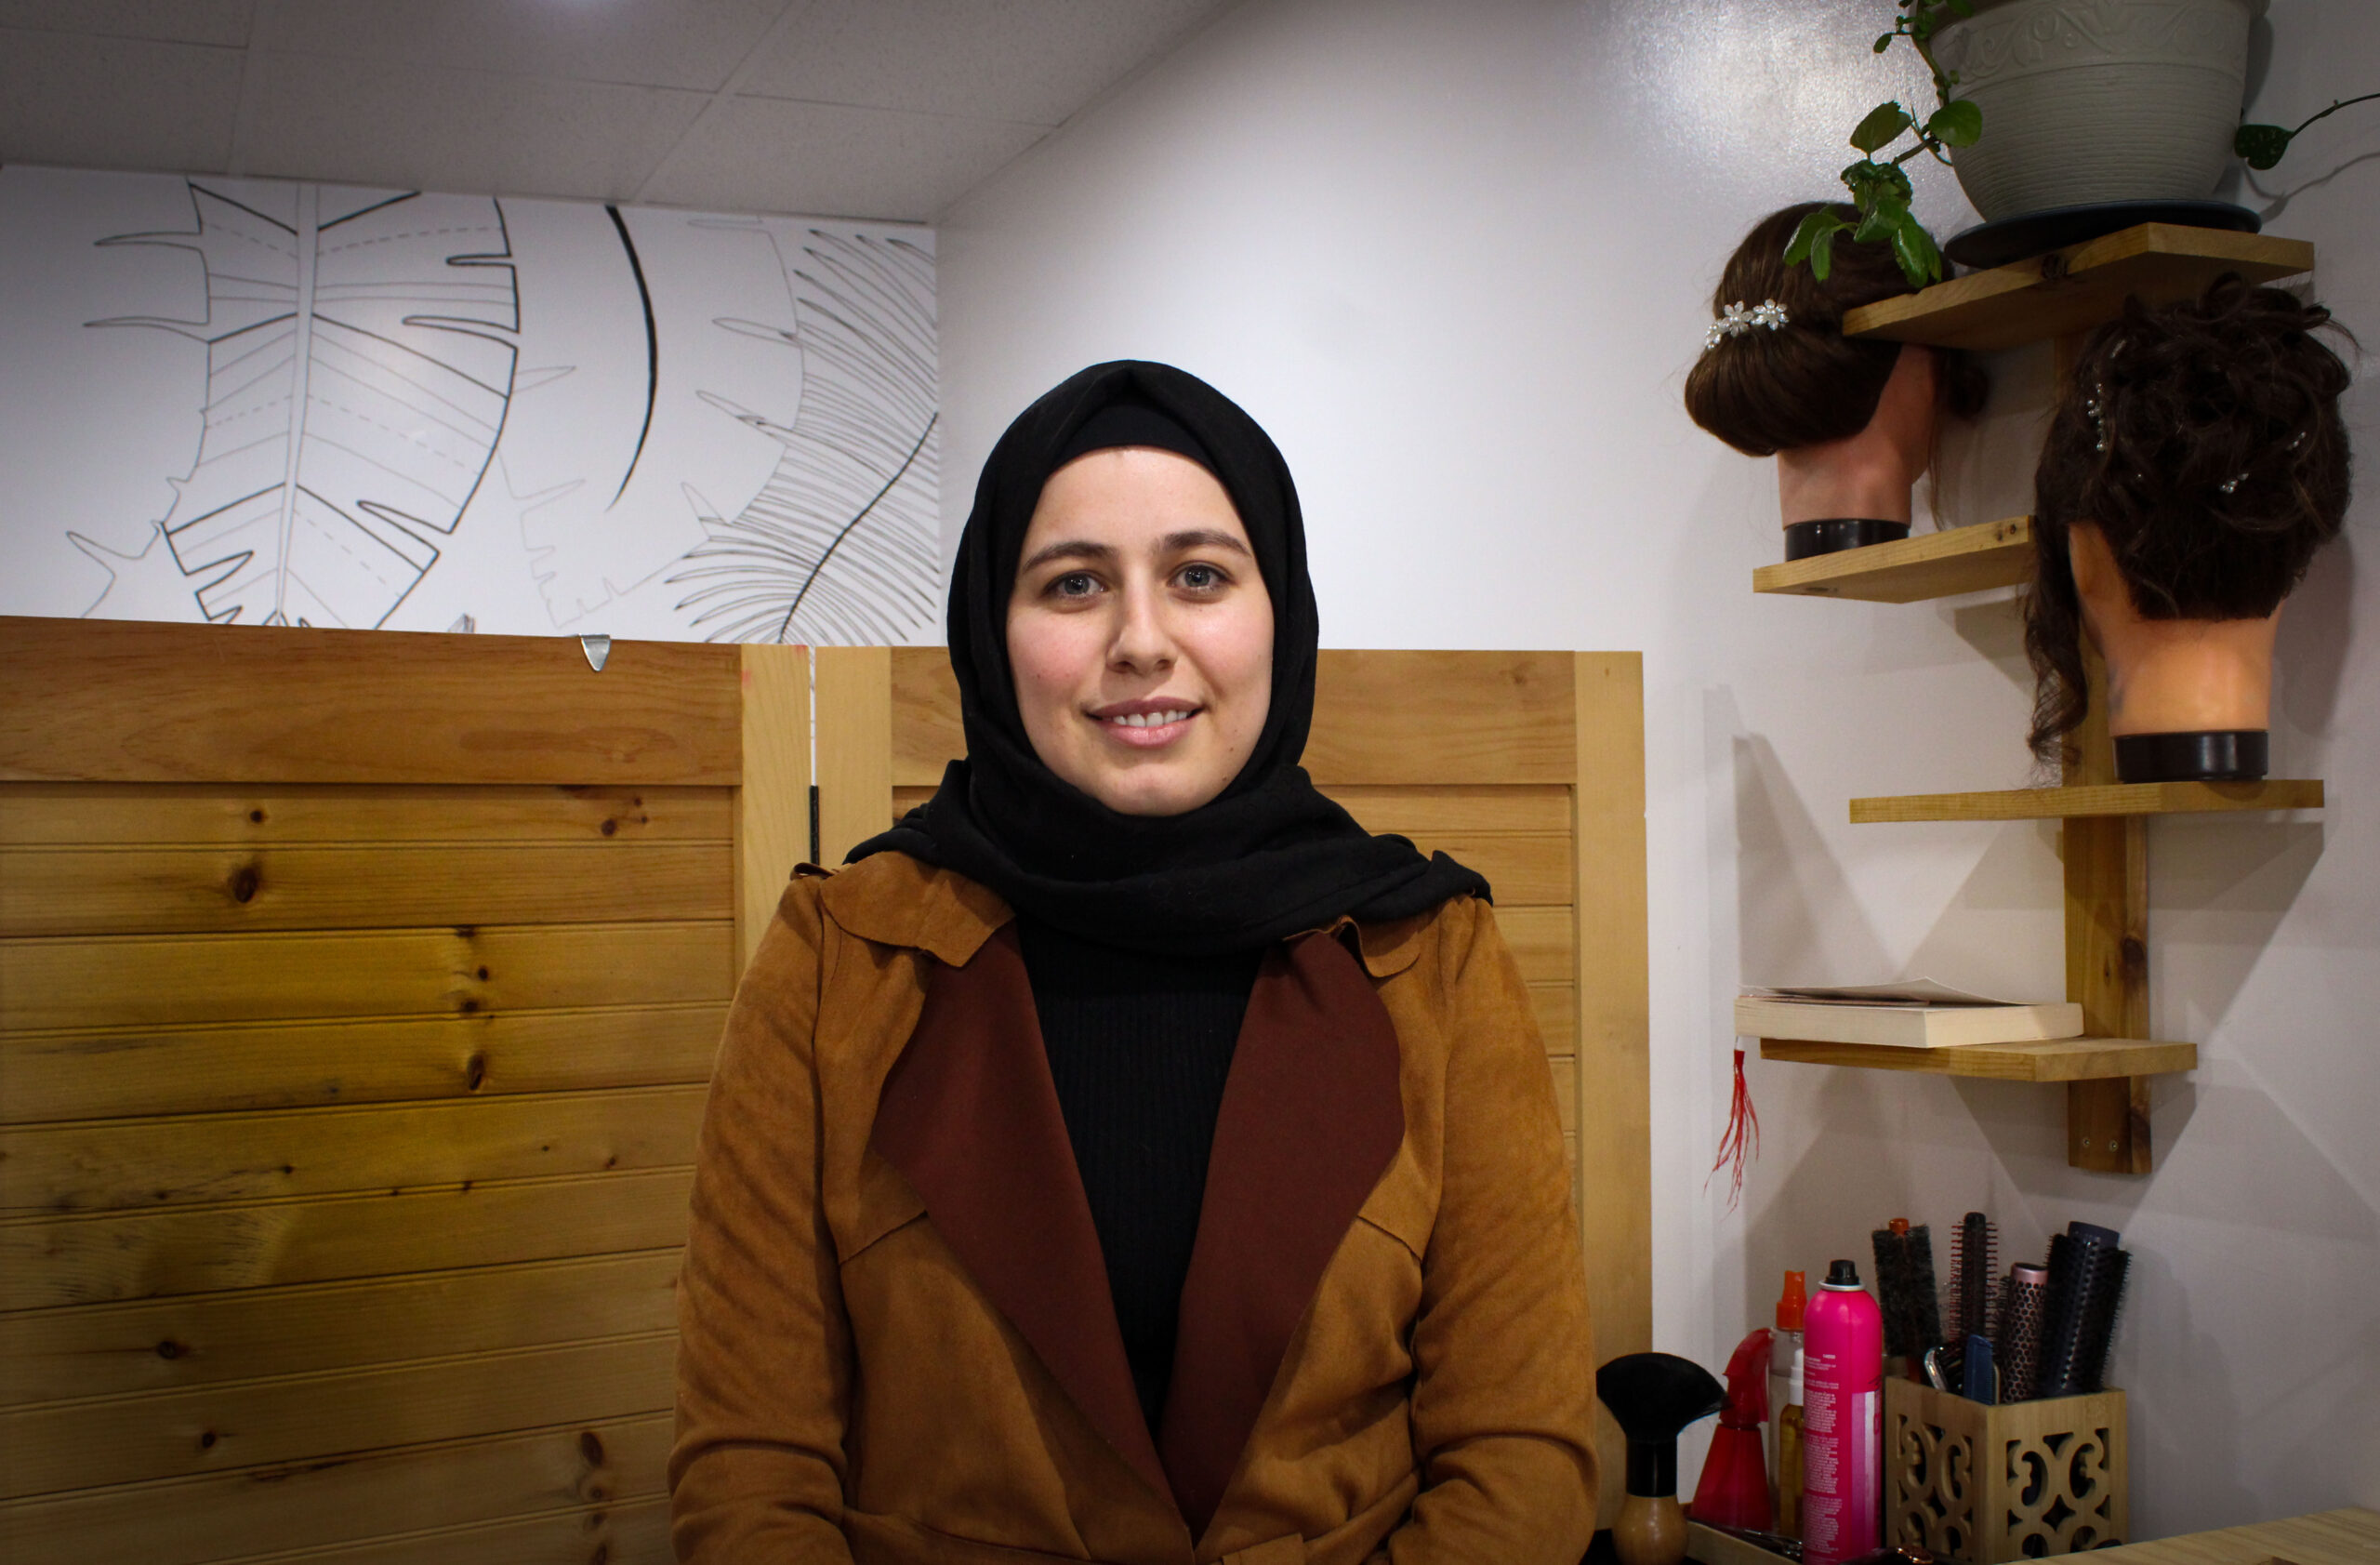 Beauty without compromise: New hijab-friendly hair salon opens - Kicker